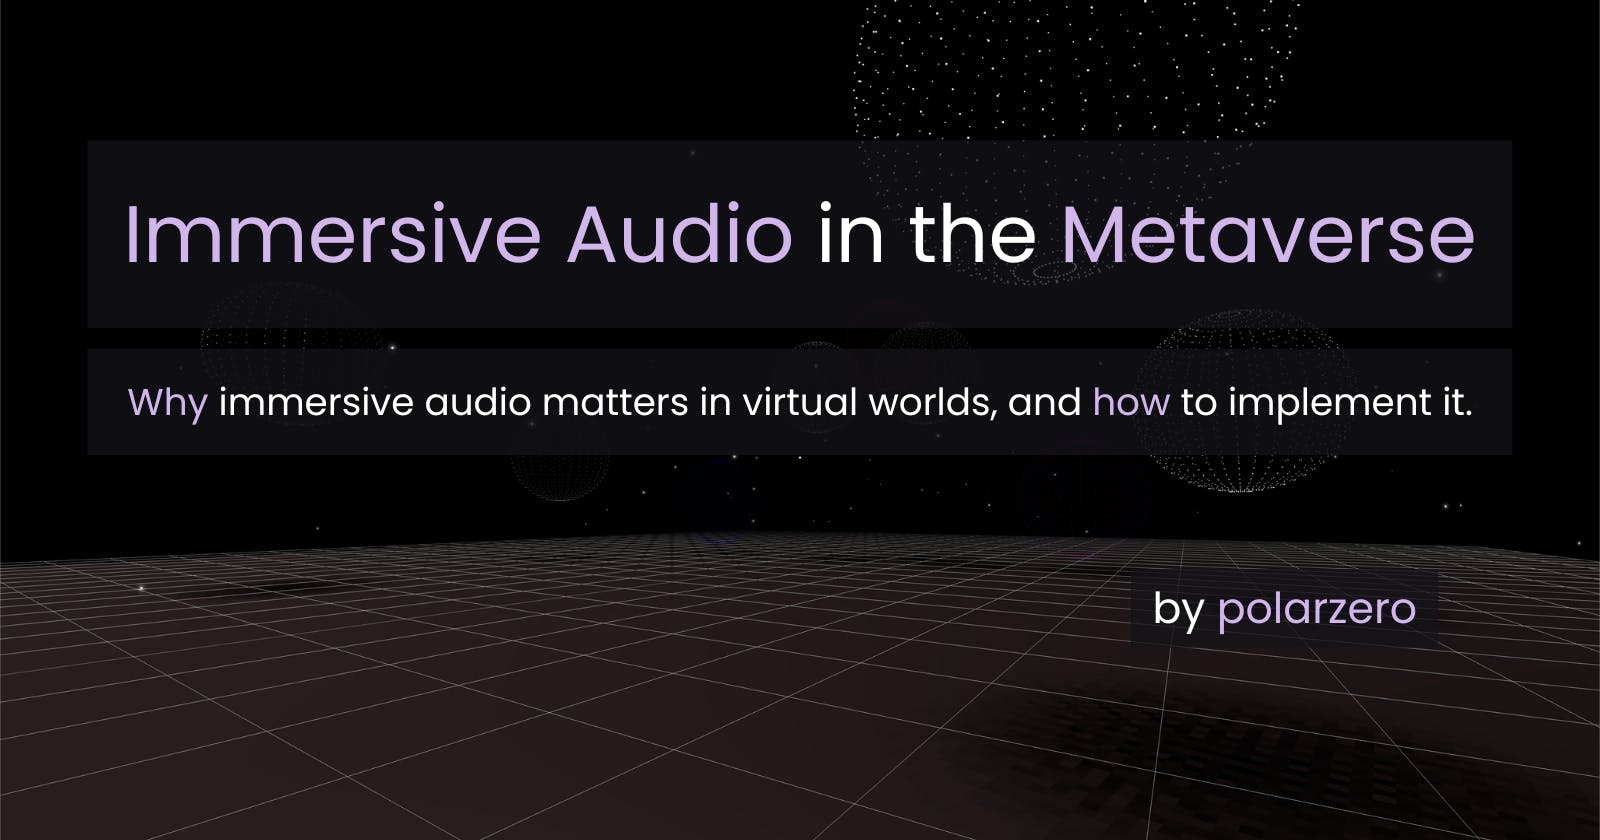 Immersive audio in the metaverse